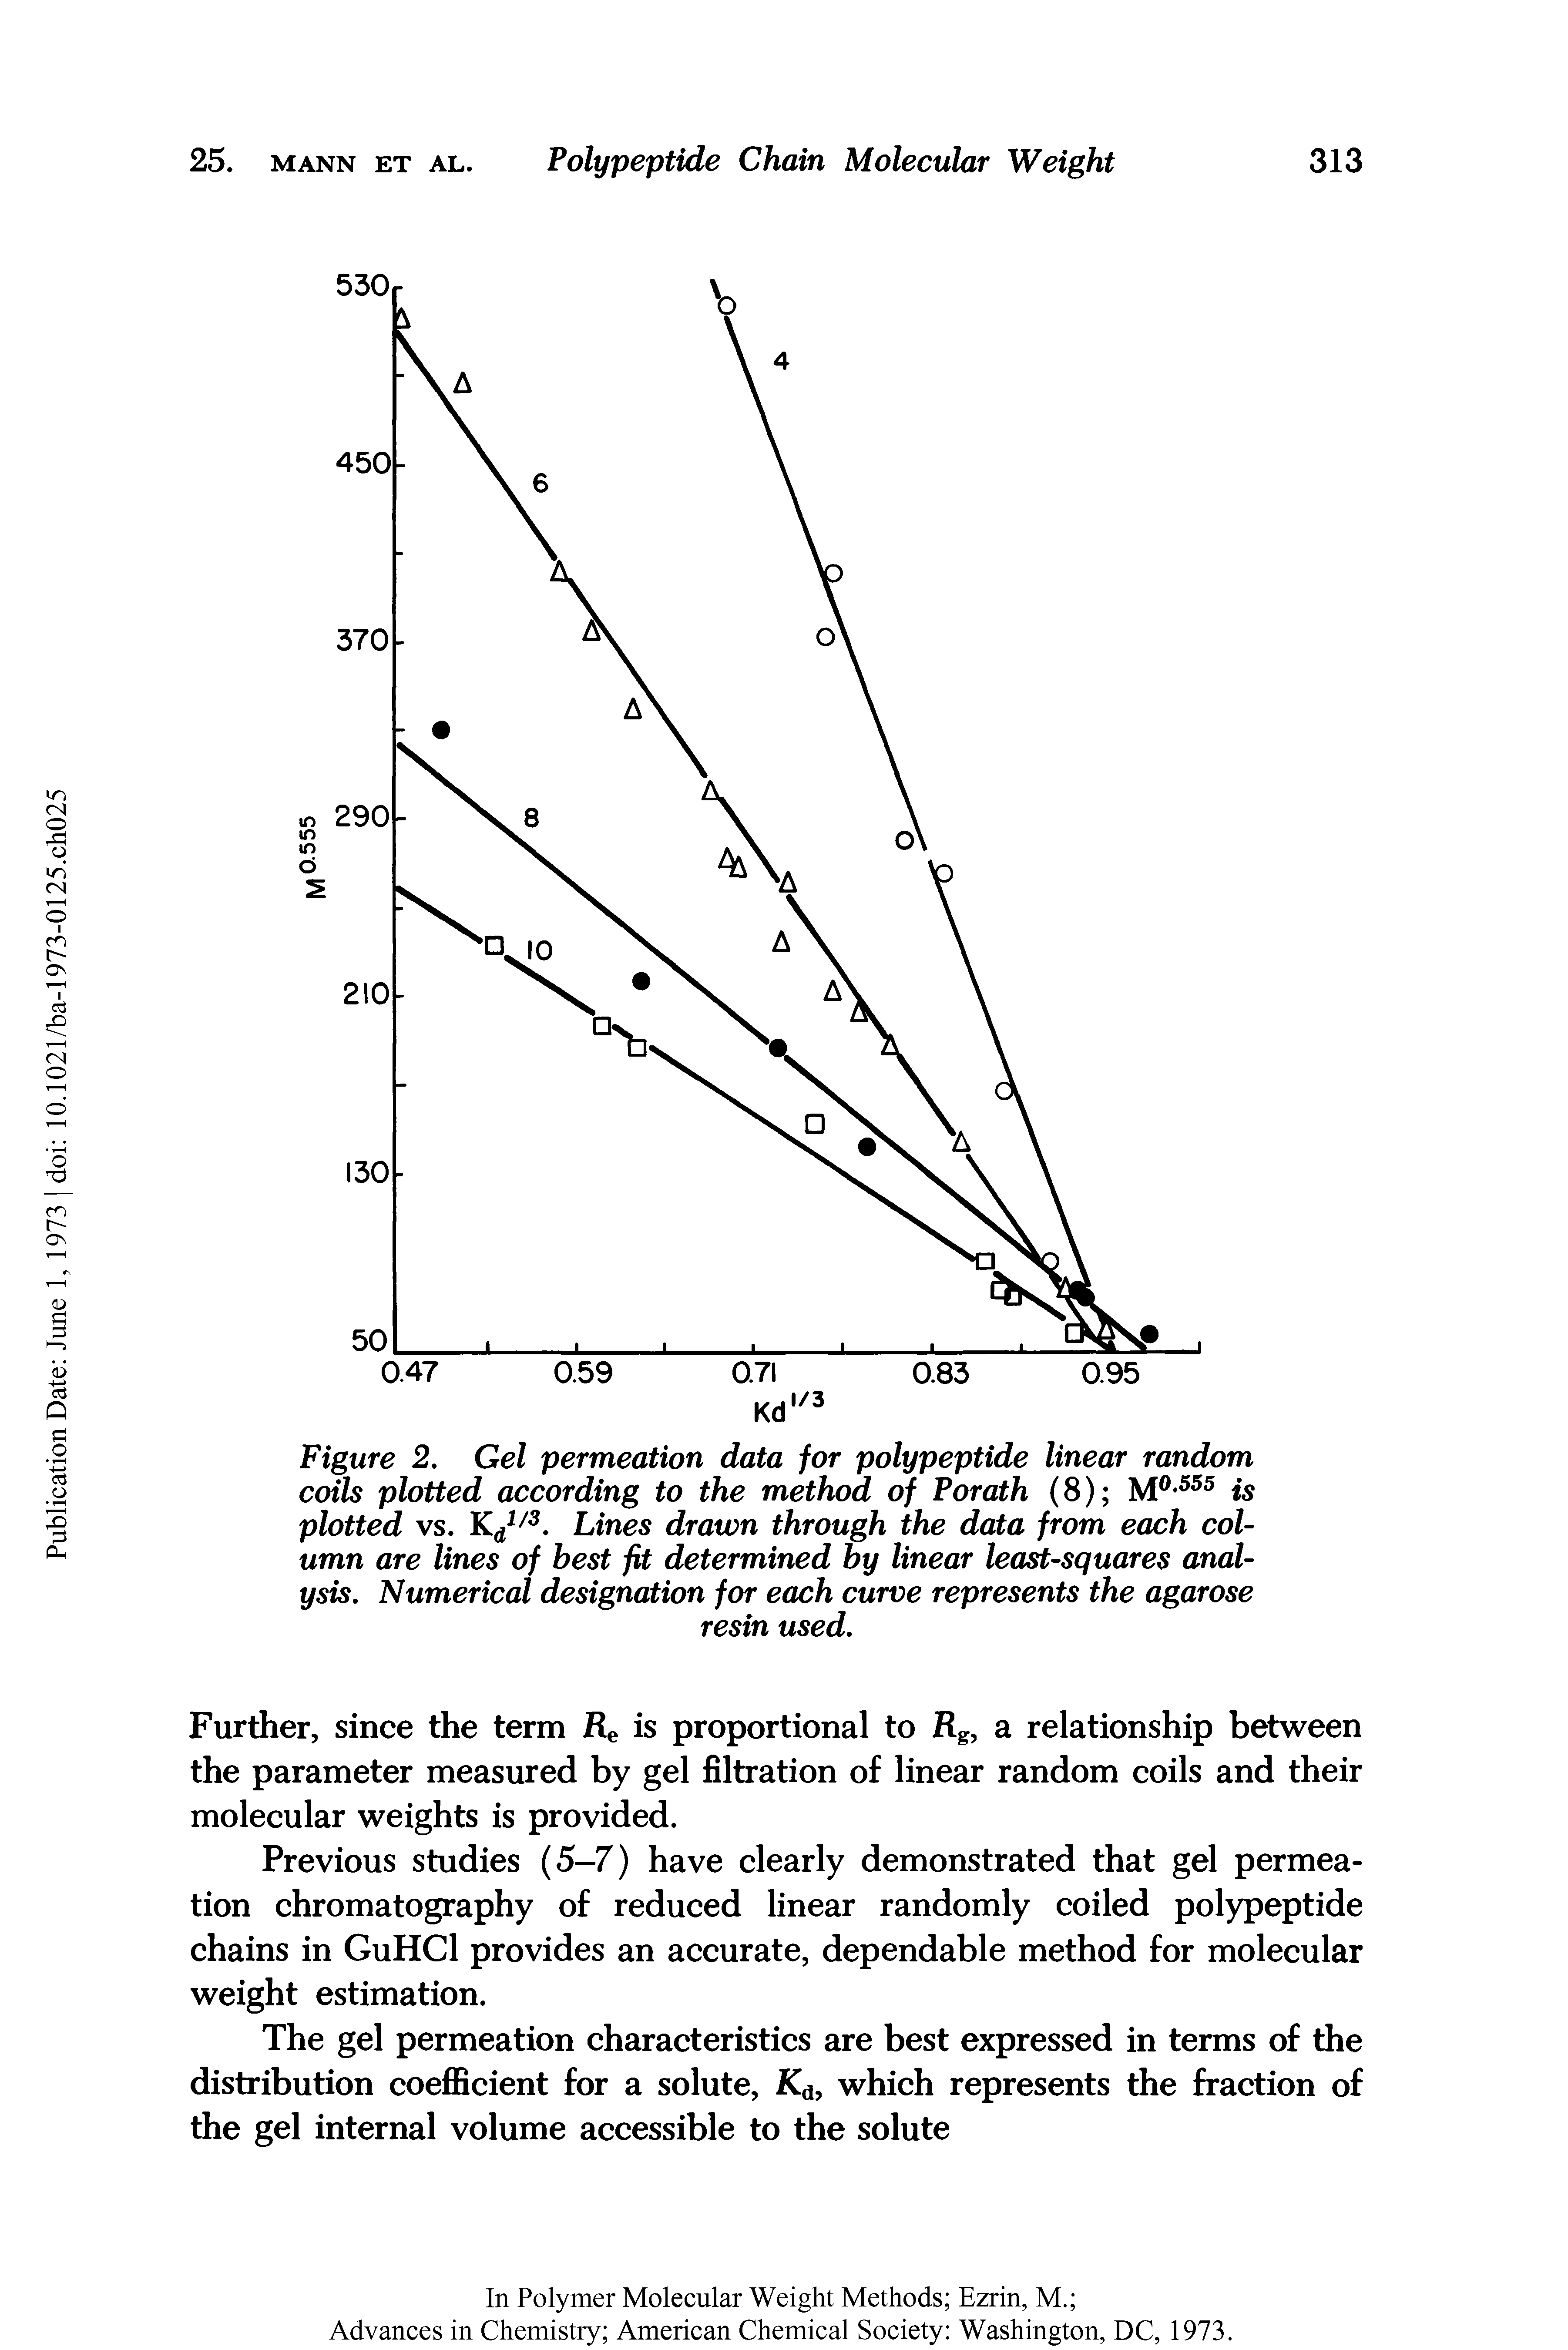 Figure 2. Gel permeation data for polypeptide linear random coils plotted according to the method of Porath (8) M0,555 is plotted vs. Kd1/3. Lines drawn through the data from each column are lines of best fit determined by linear least-squares analysis. Numerical designation for each curve represents the agarose...